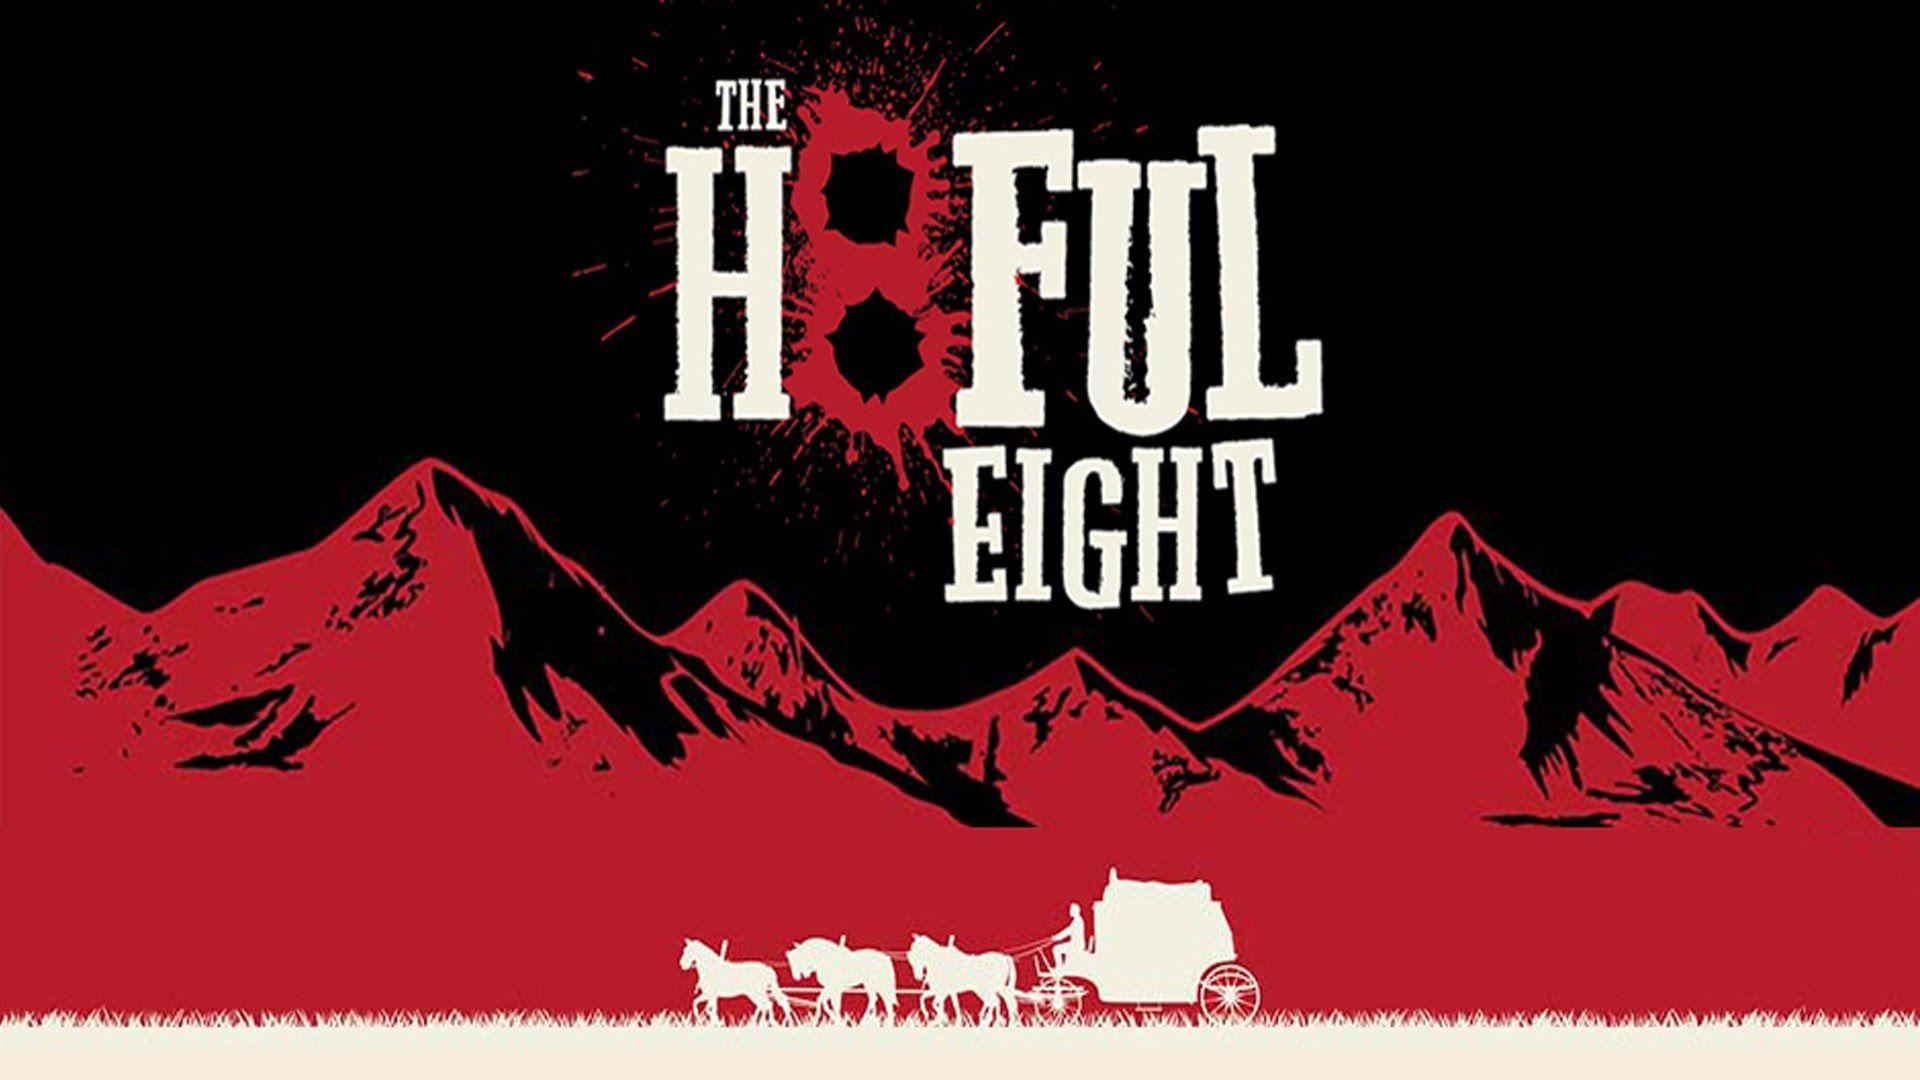 The Hateful Eight Wallpaper, 43 The Hateful Eight Image